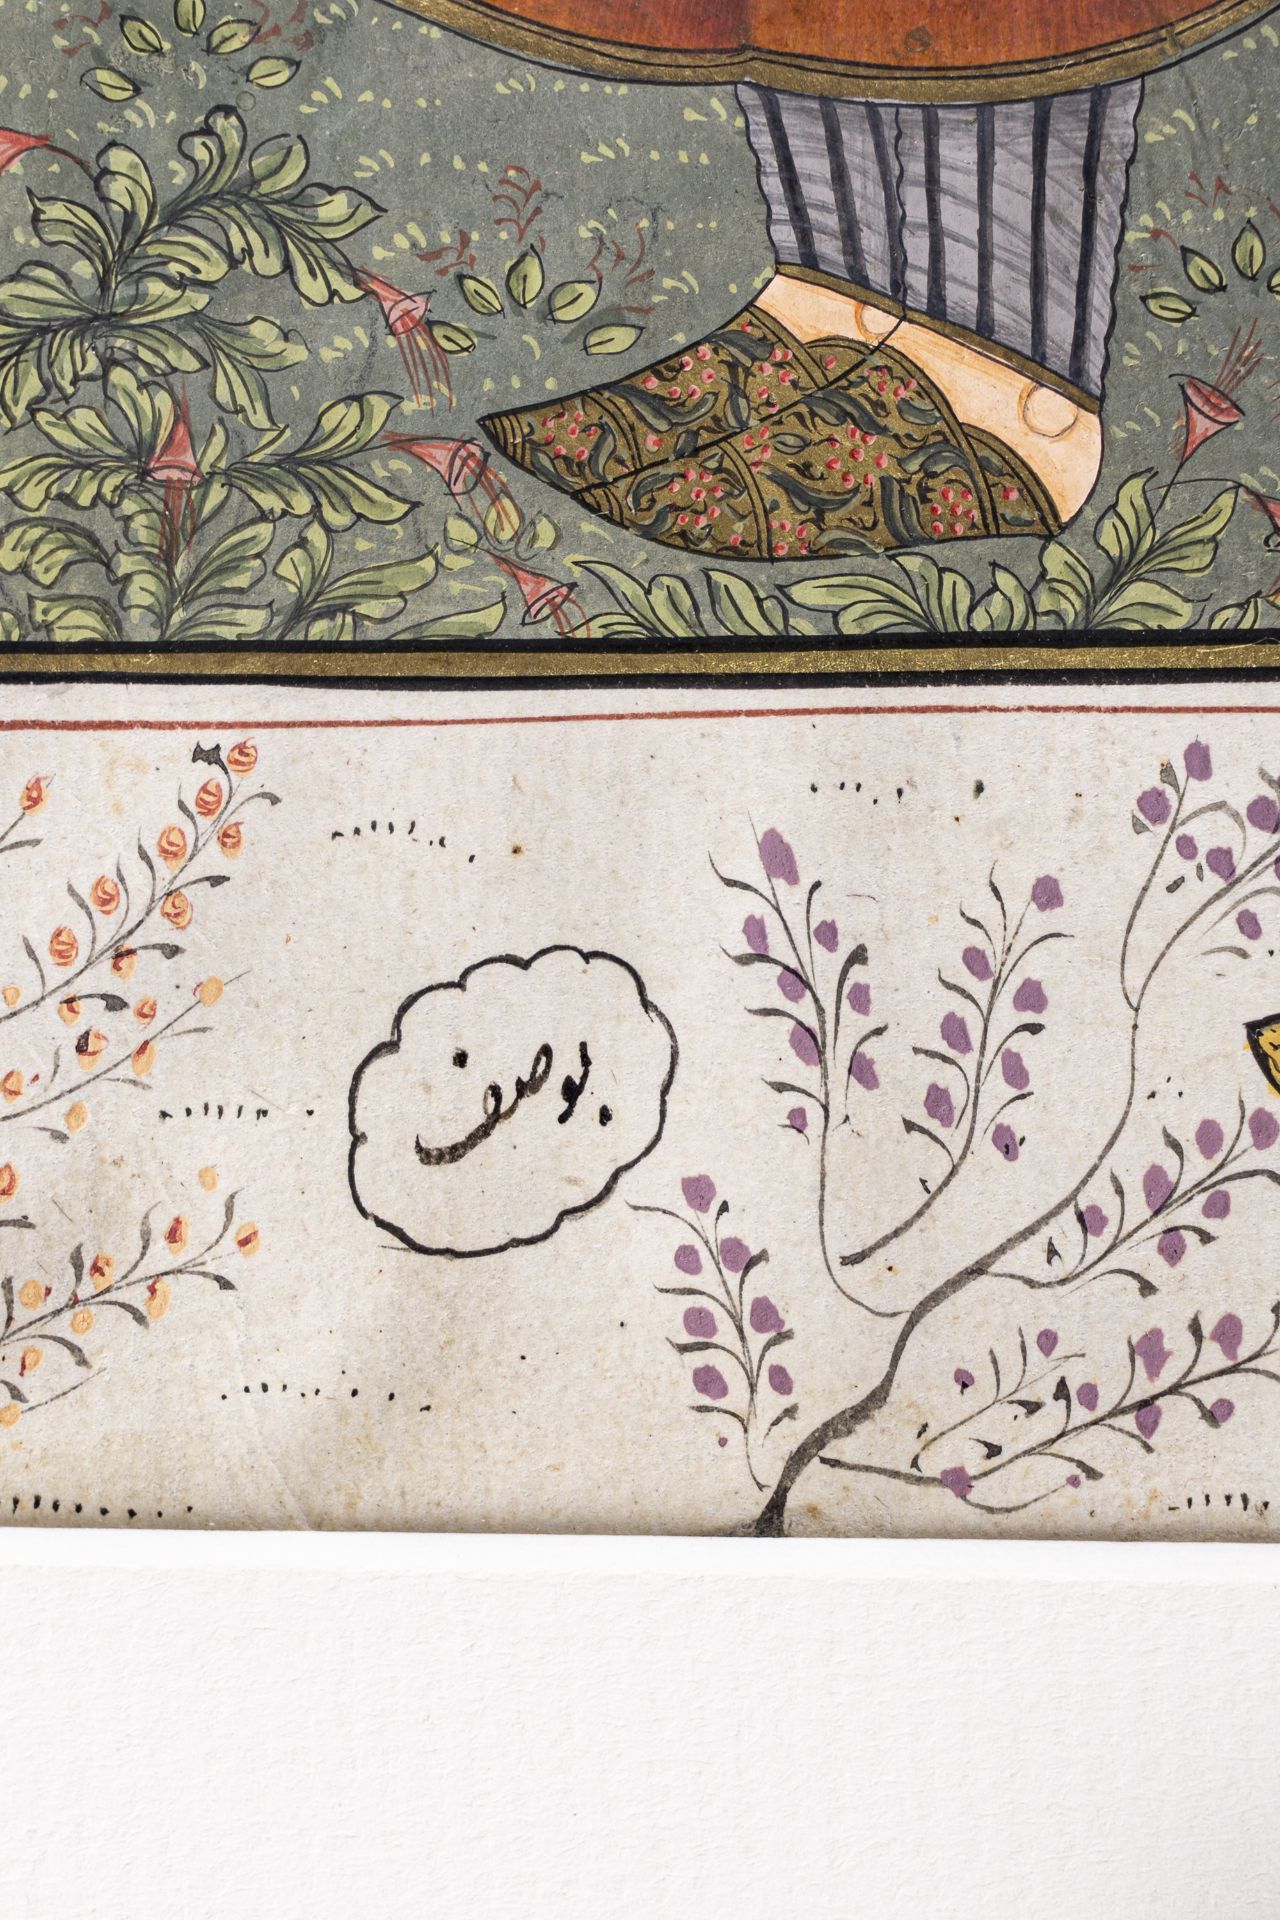 A MUGHAL MANUSCRIPT PAGE, LATE 19th CENTURY - Image 7 of 7